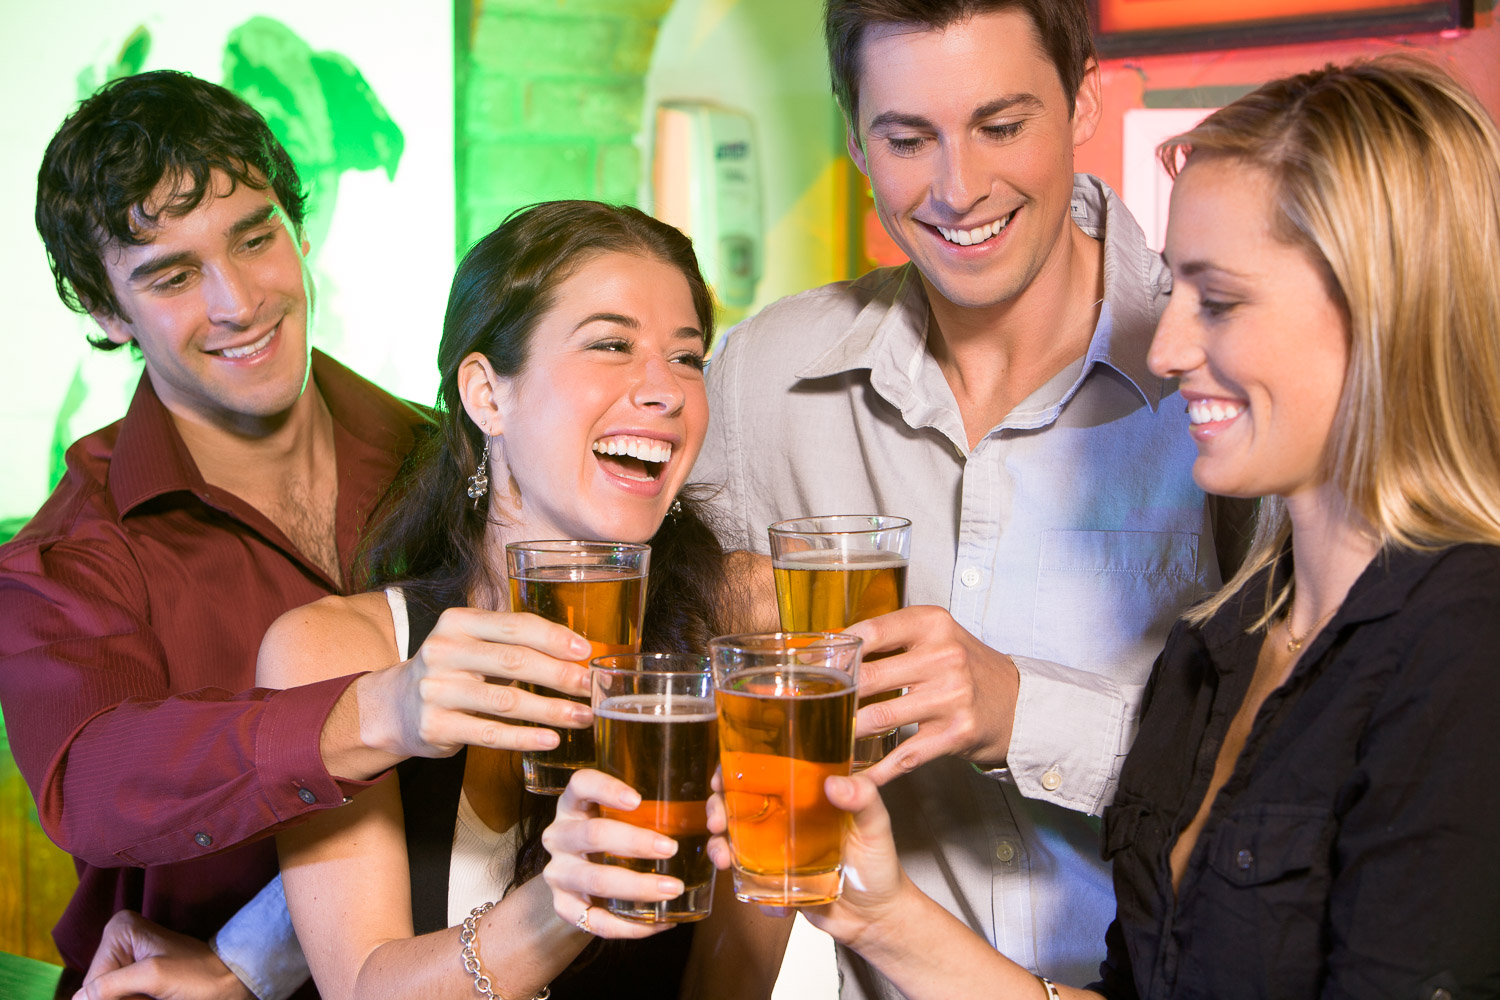 young adults celebrating with beers.jpg